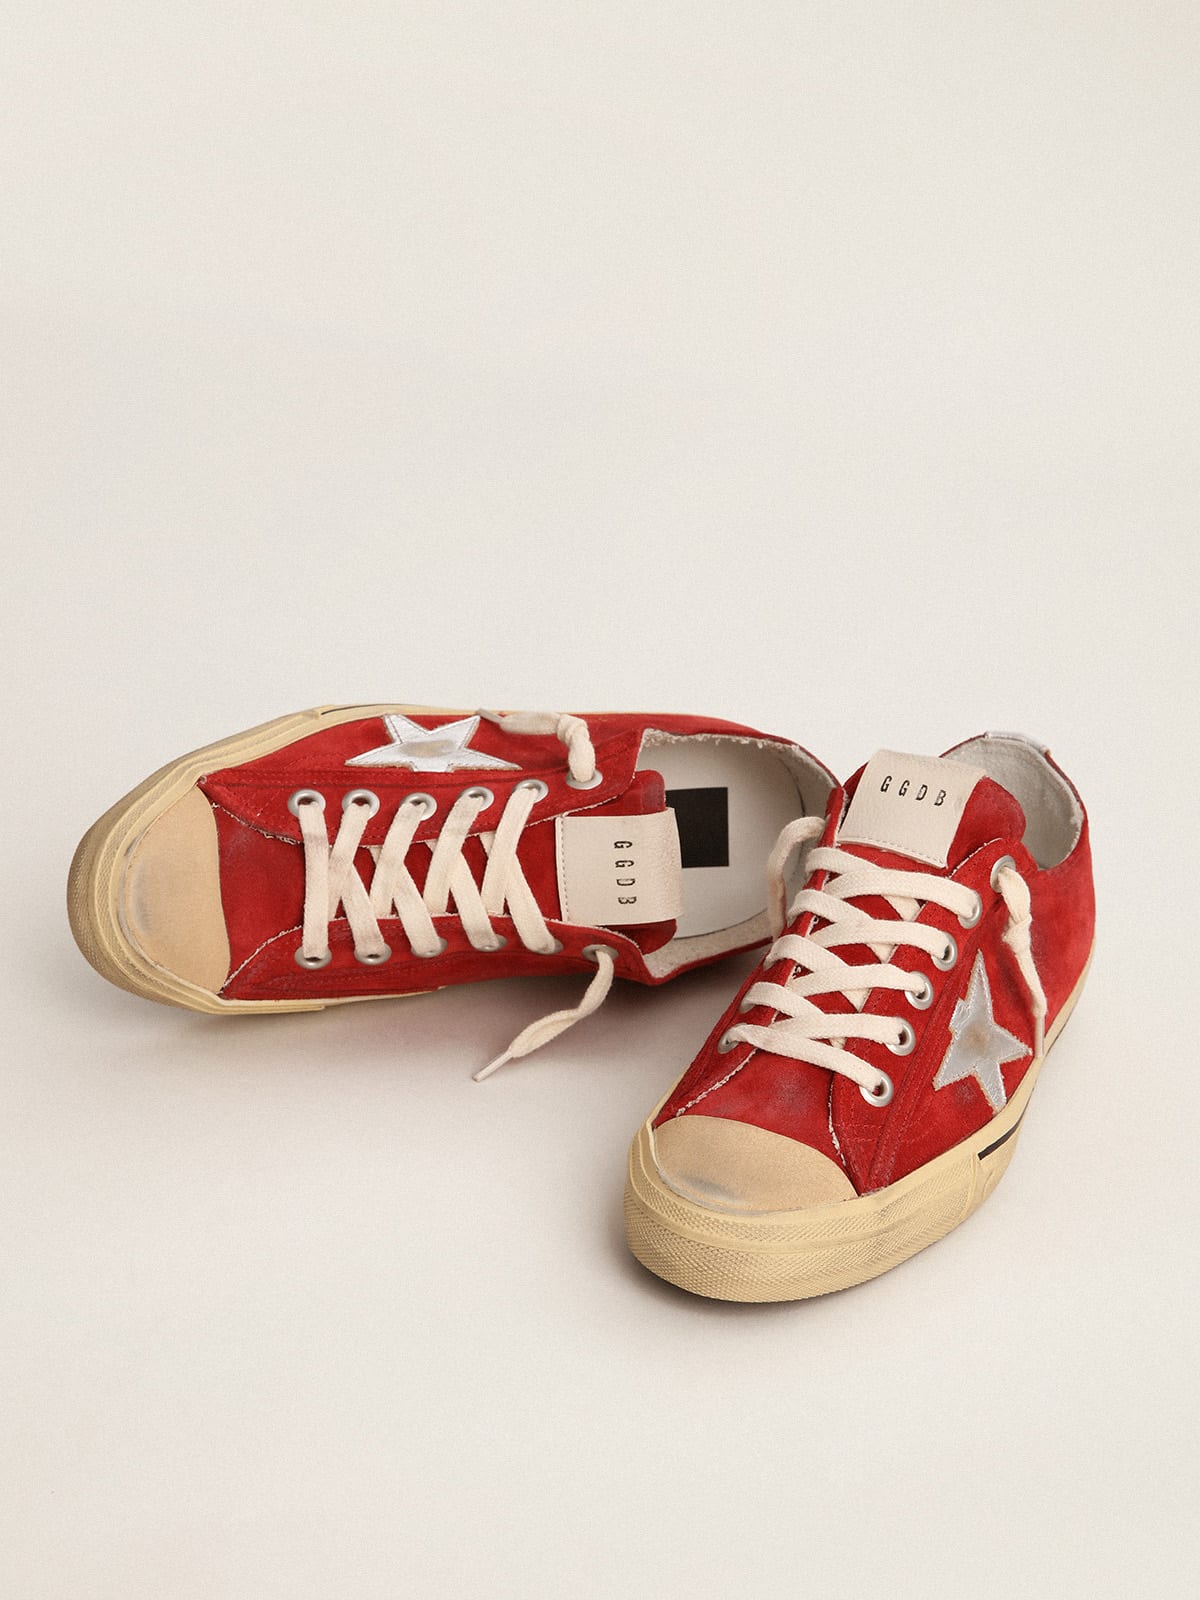 Golden Goose - V-Star LTD sneakers in dark red suede with silver metallic leather star and heel tab in 